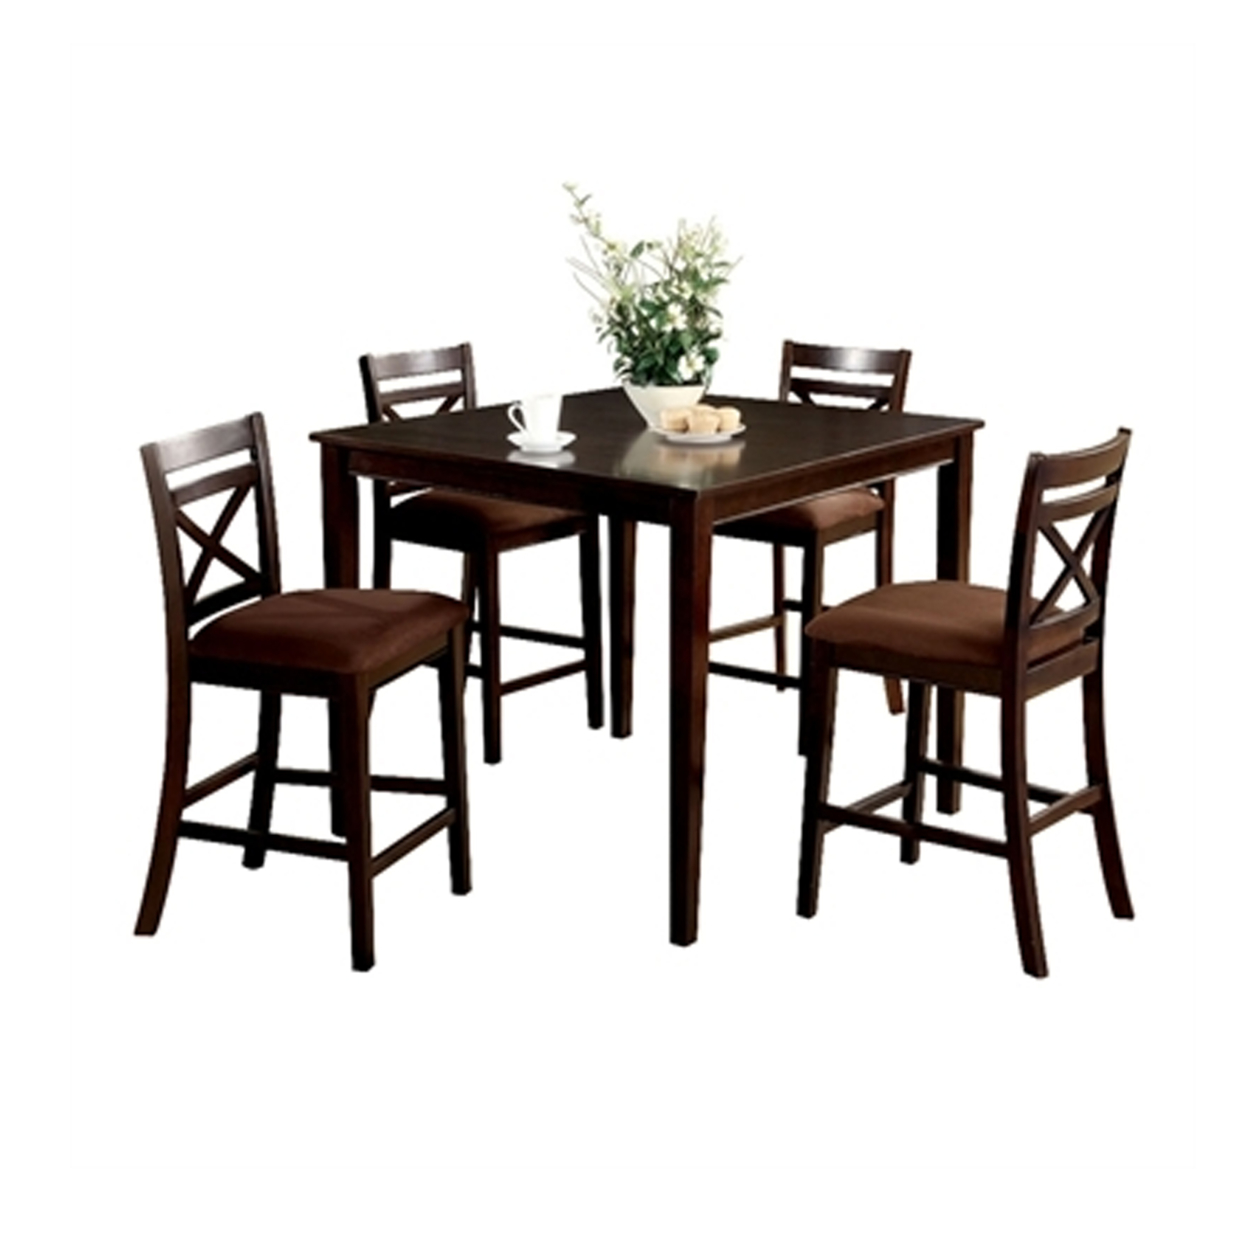 5 Piece Wooden Counter Height Table With Crossback Chairs, Espresso Brown- Saltoro Sherpi